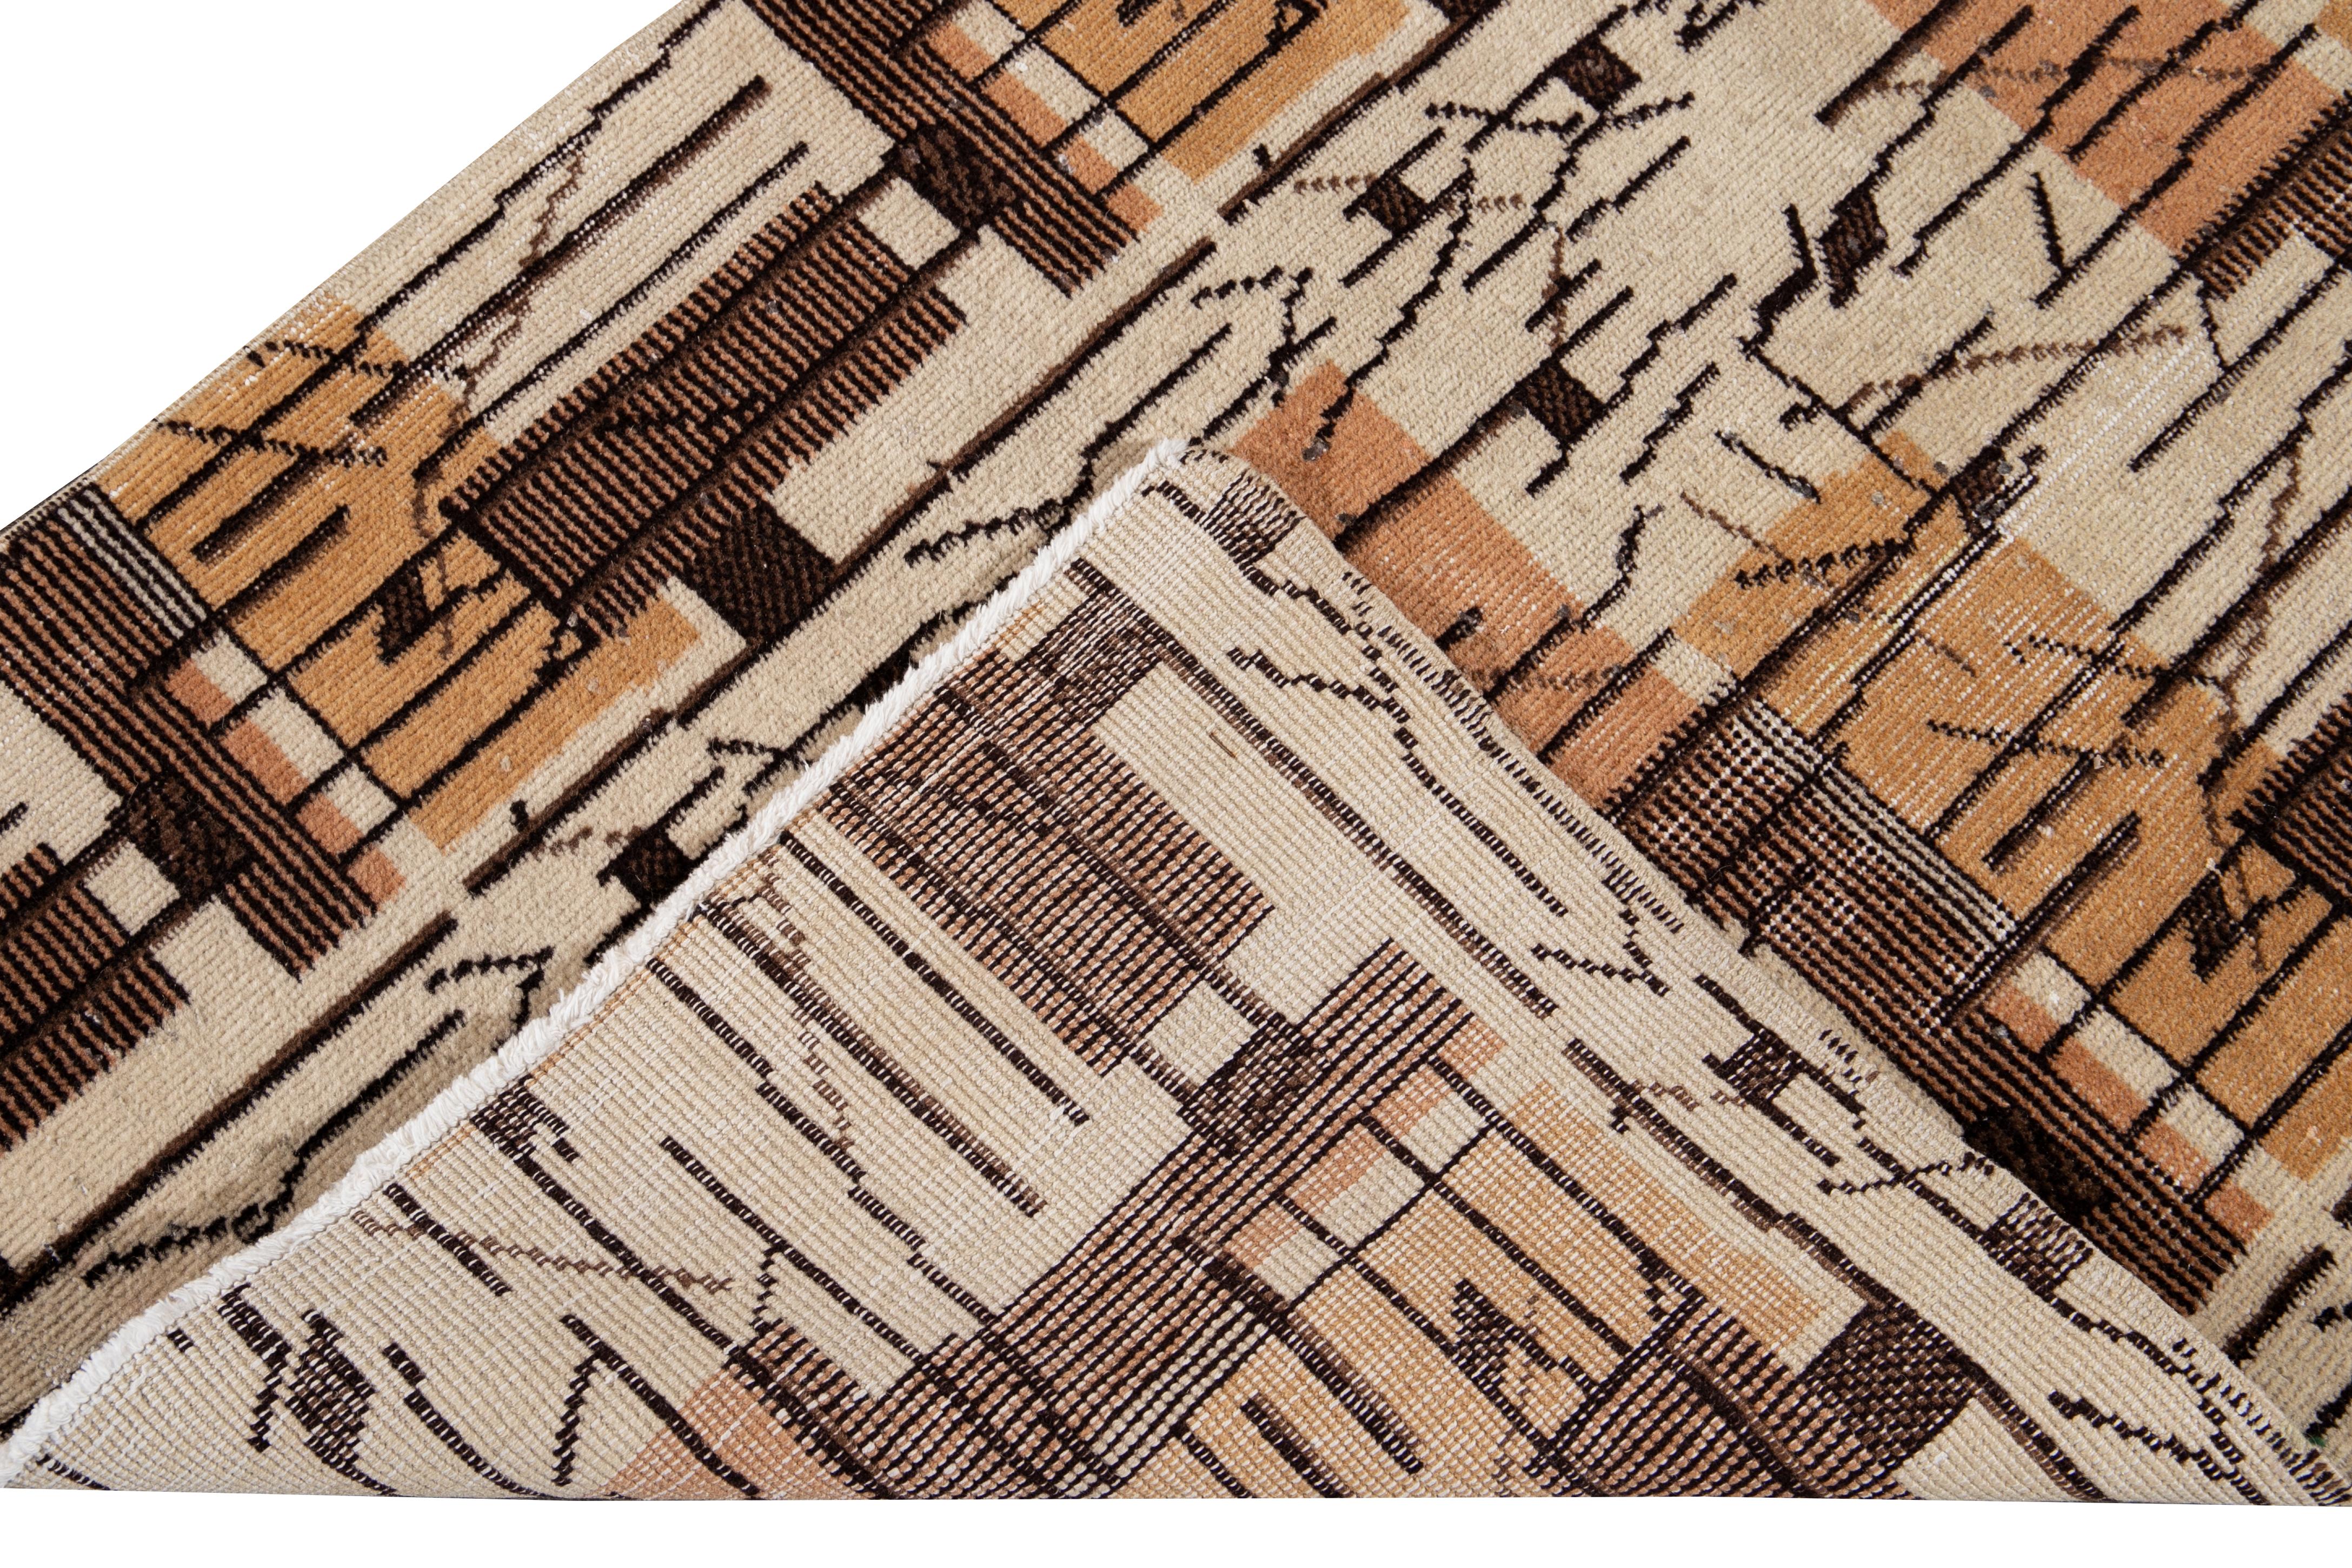 Beautiful vintage Turkish hand-knotted wool runner with a beige field. This Turkish runner has a brown and tan accent in a gorgeous all-over Abstract Expressionist design.

This runner measures: 2'10